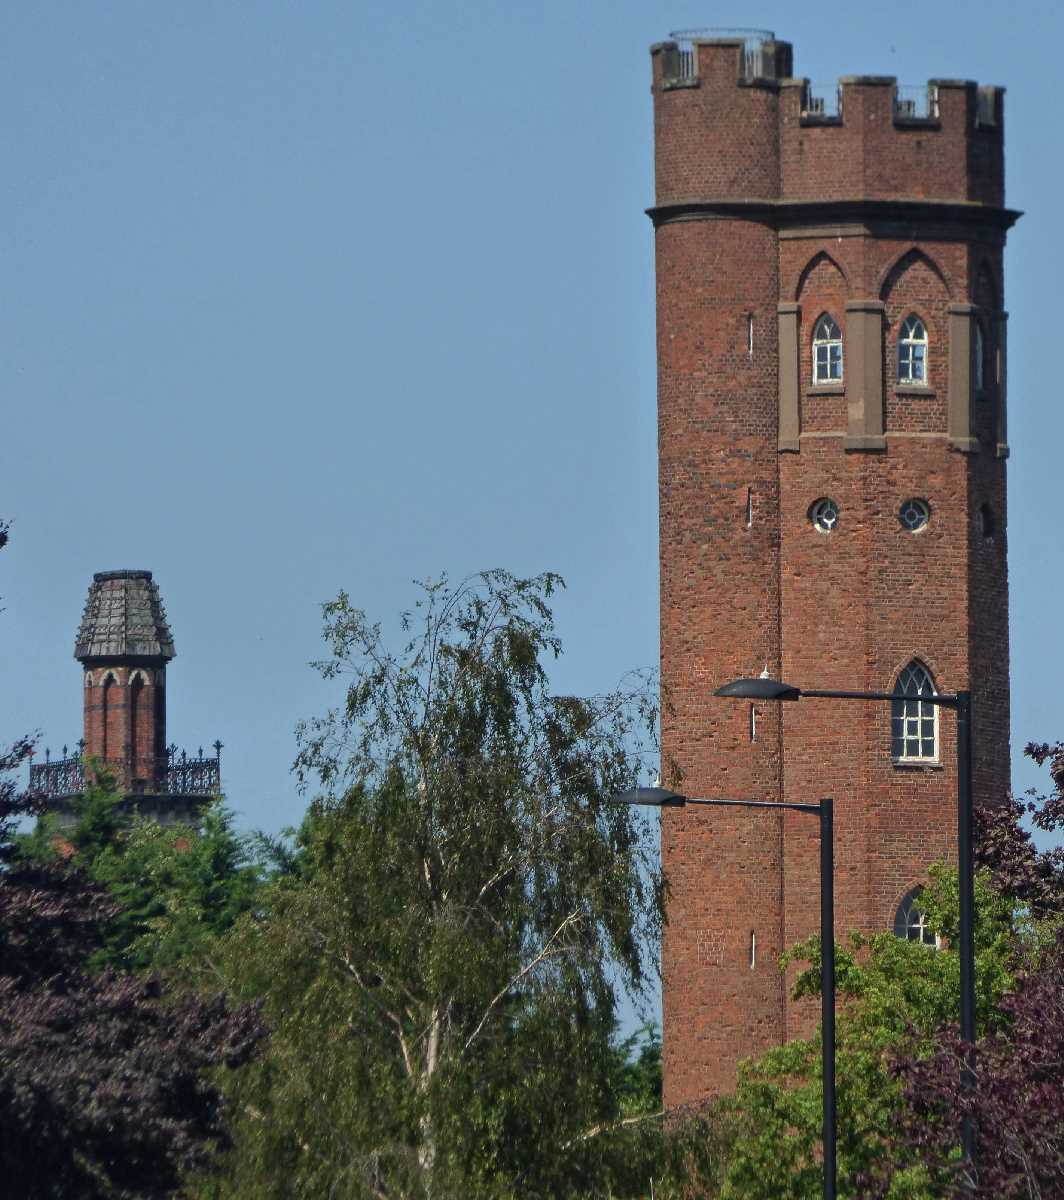 J.R.R. Tolkien's The Two Towers: Perrott's Folly and the Edgbaston Waterworks Tower